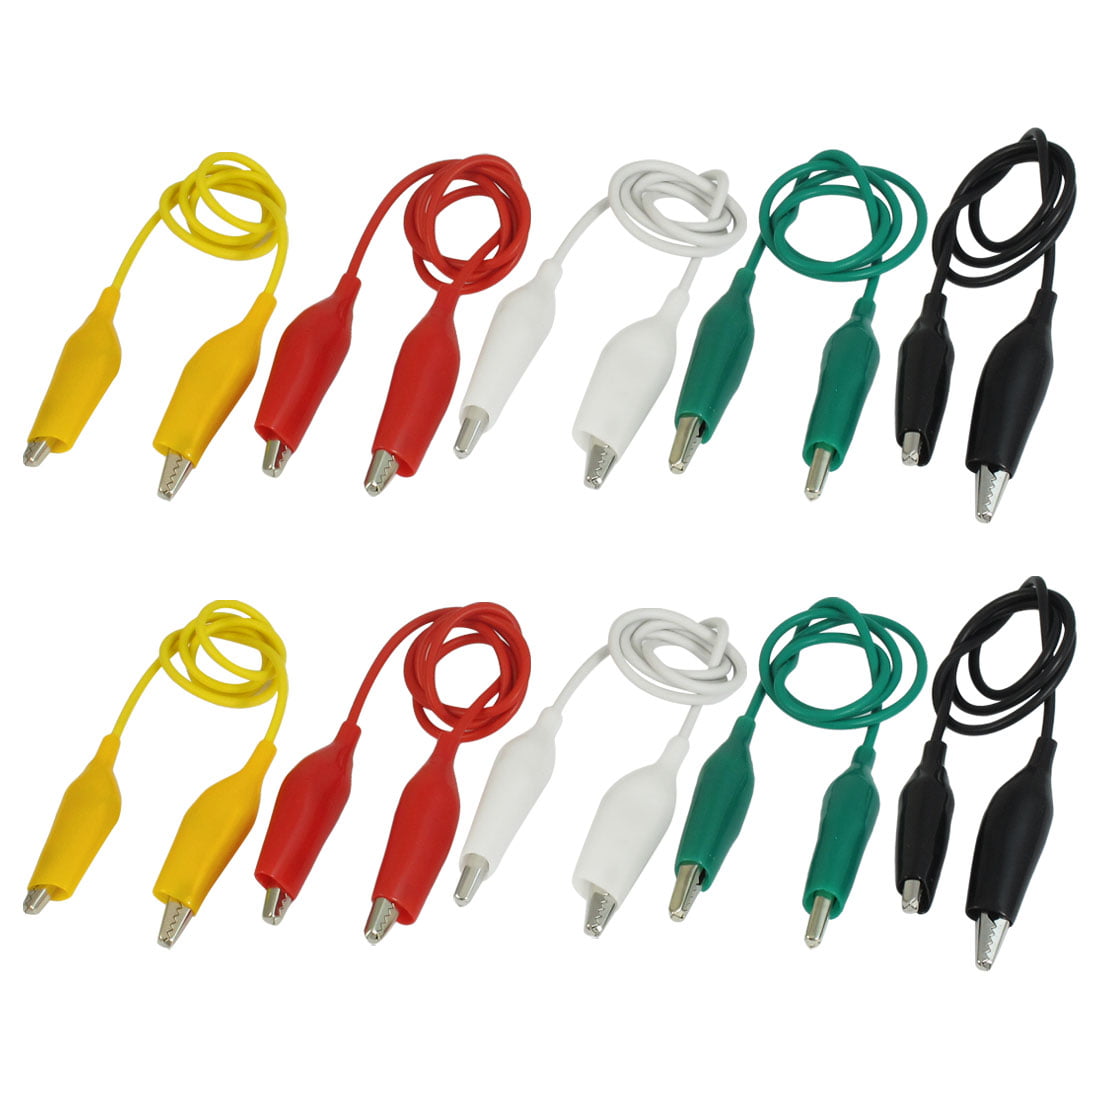 10Pcs and 5 Colors Test Lead Set Alligator Clip 20.5 inches Double-ended Lead 